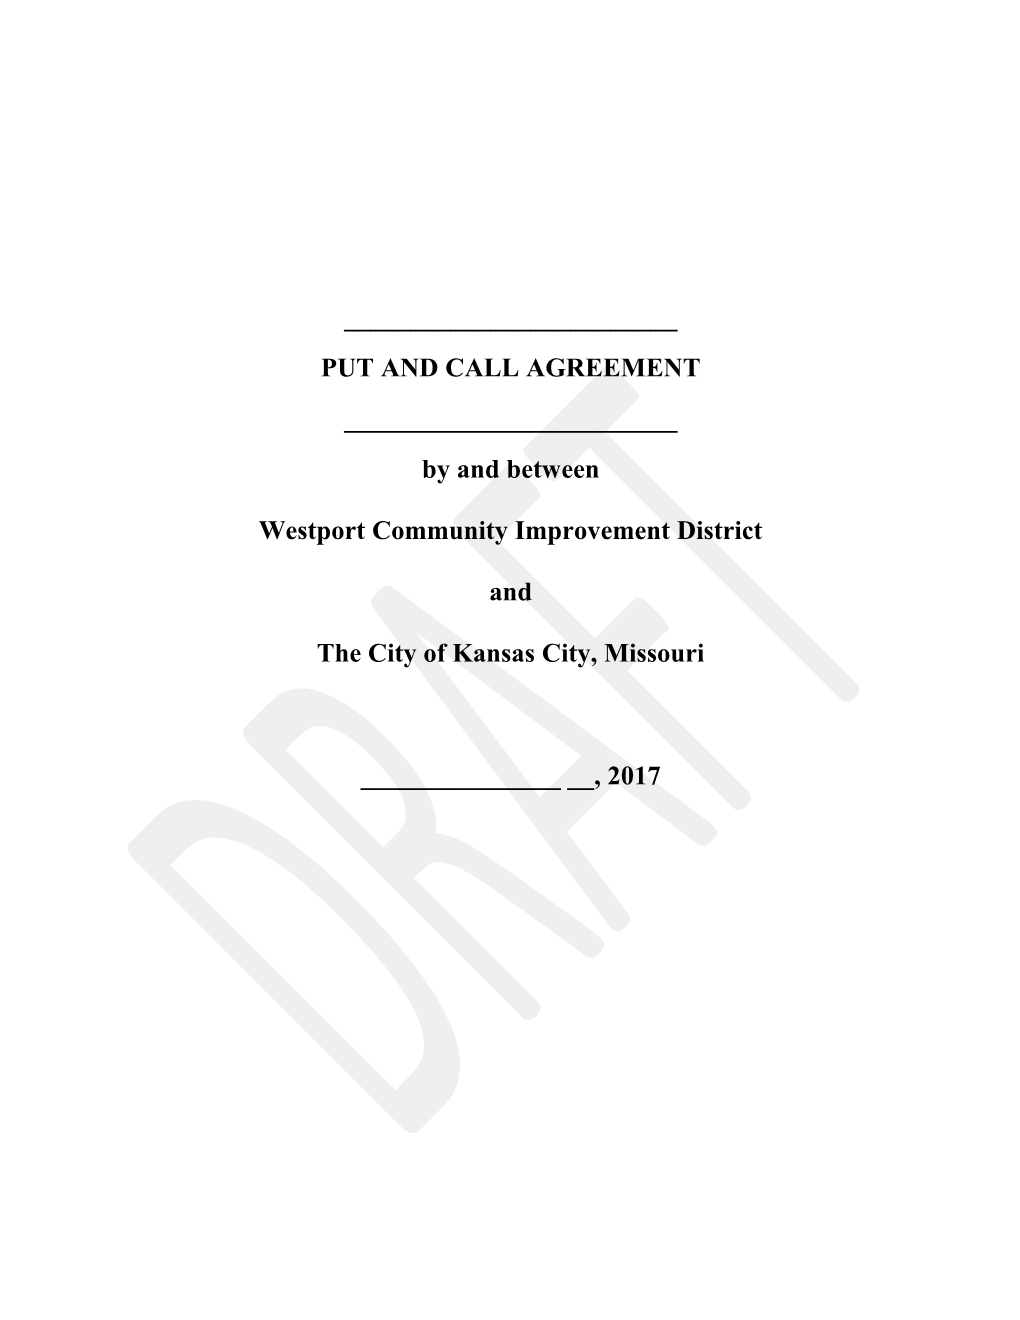 Put and Call Agreement